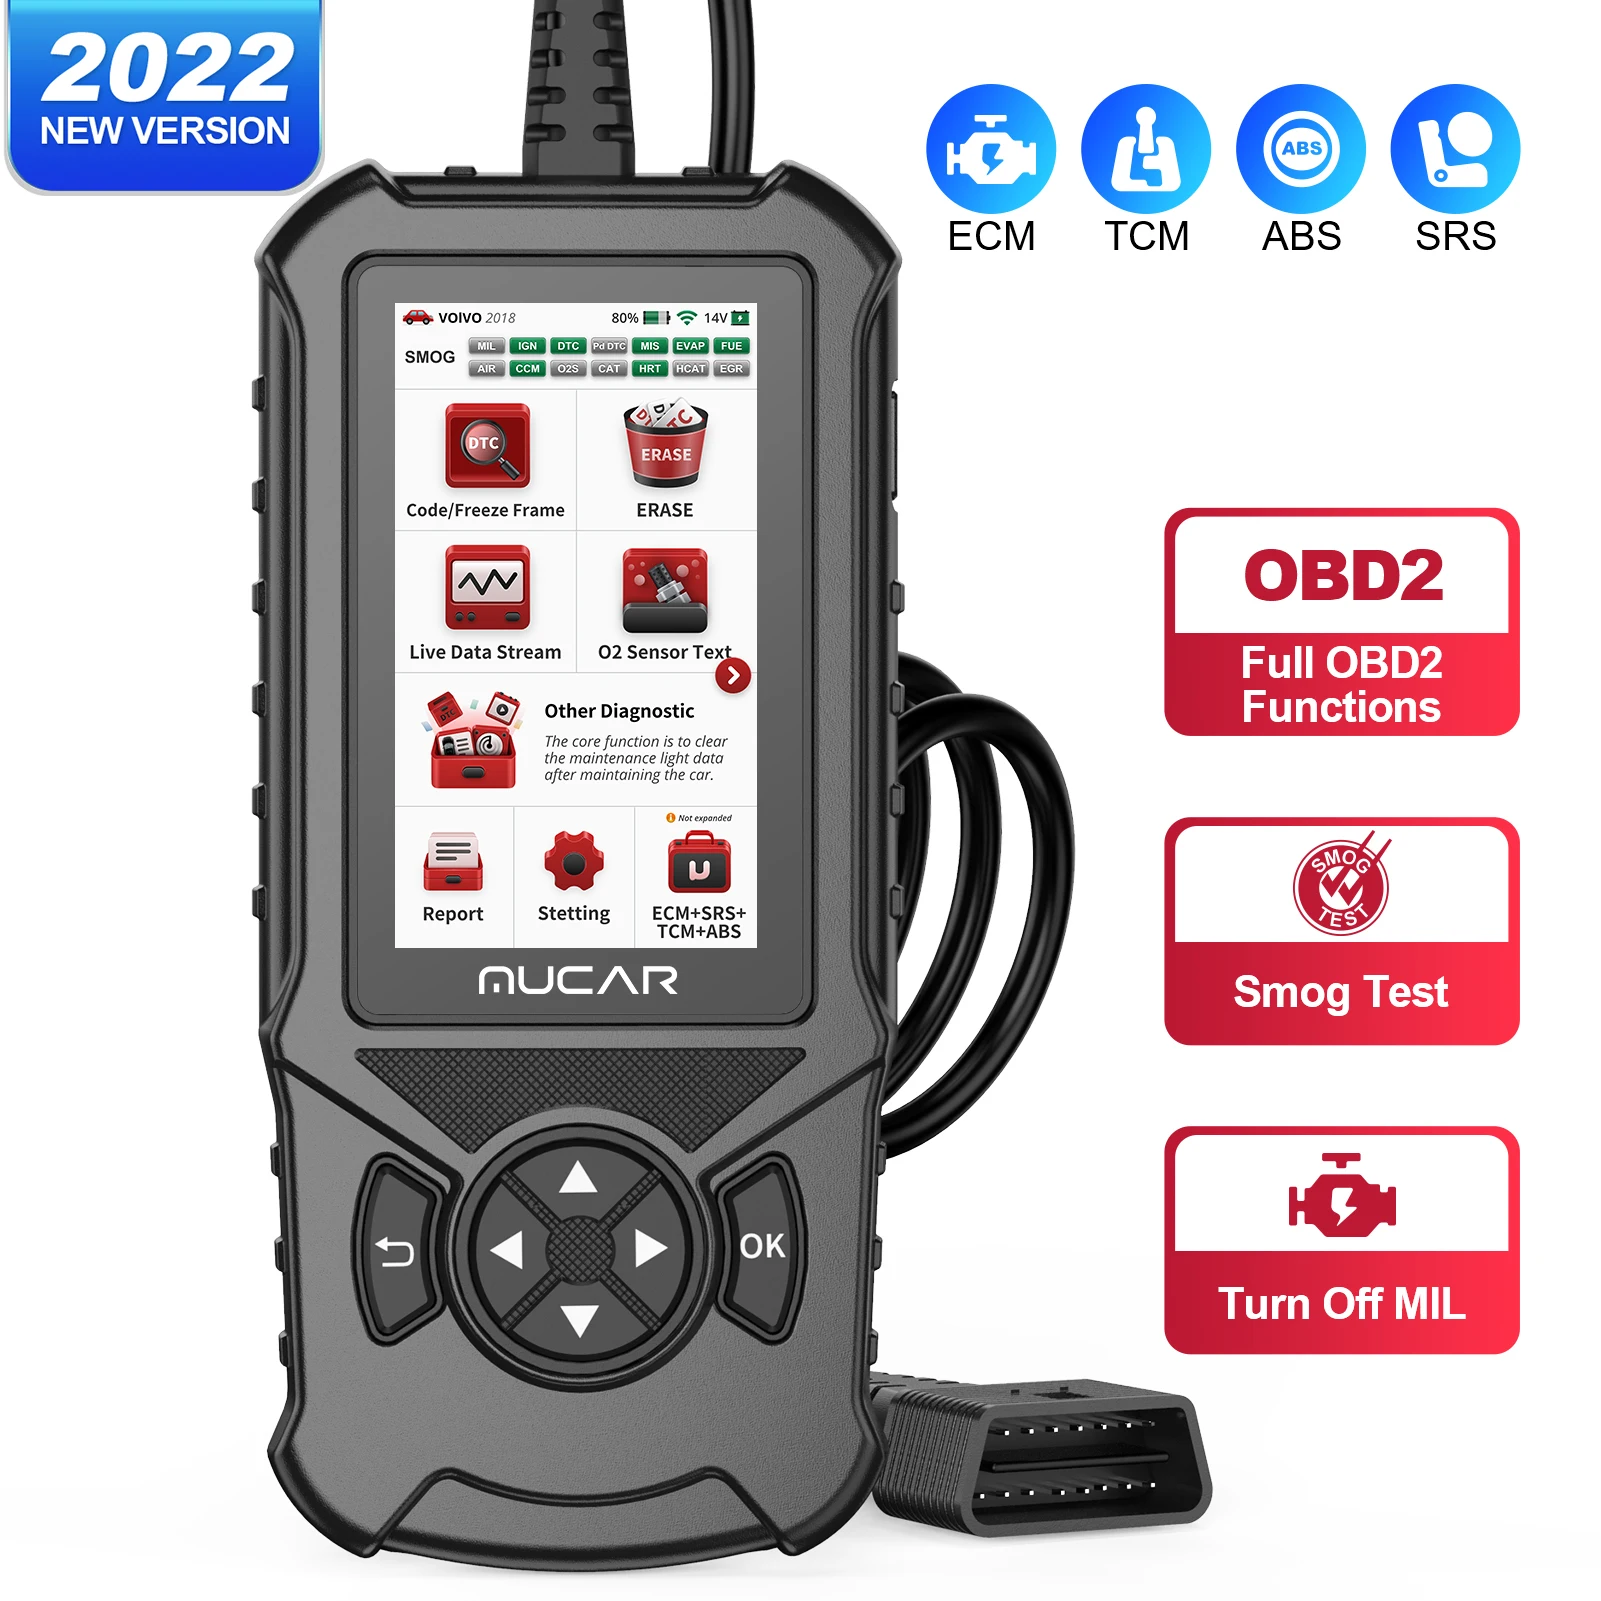 Original Mucar CDE900 OBD2 Diagnostic Tools 16G ROM WIFI 4 Systems AT Engine Automotive OBD 2 Code Reader Car Scanner Scan Tool